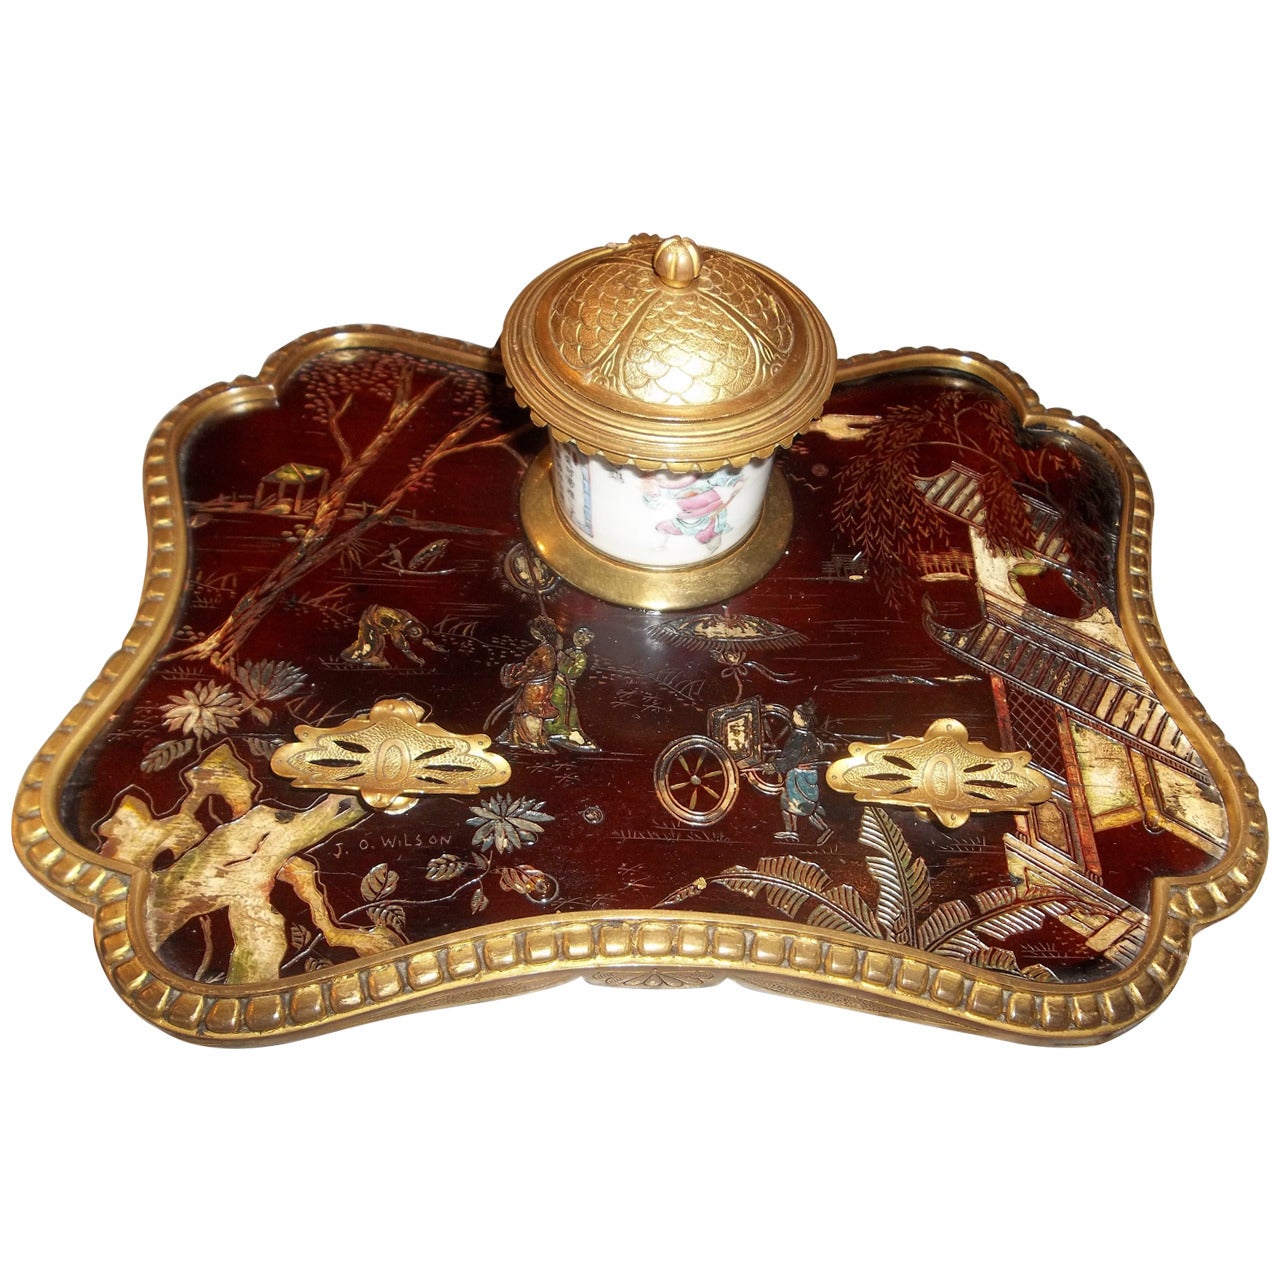 Japanned or Chinoiserie Decorated Louis XV Style Lacquer Inkwell